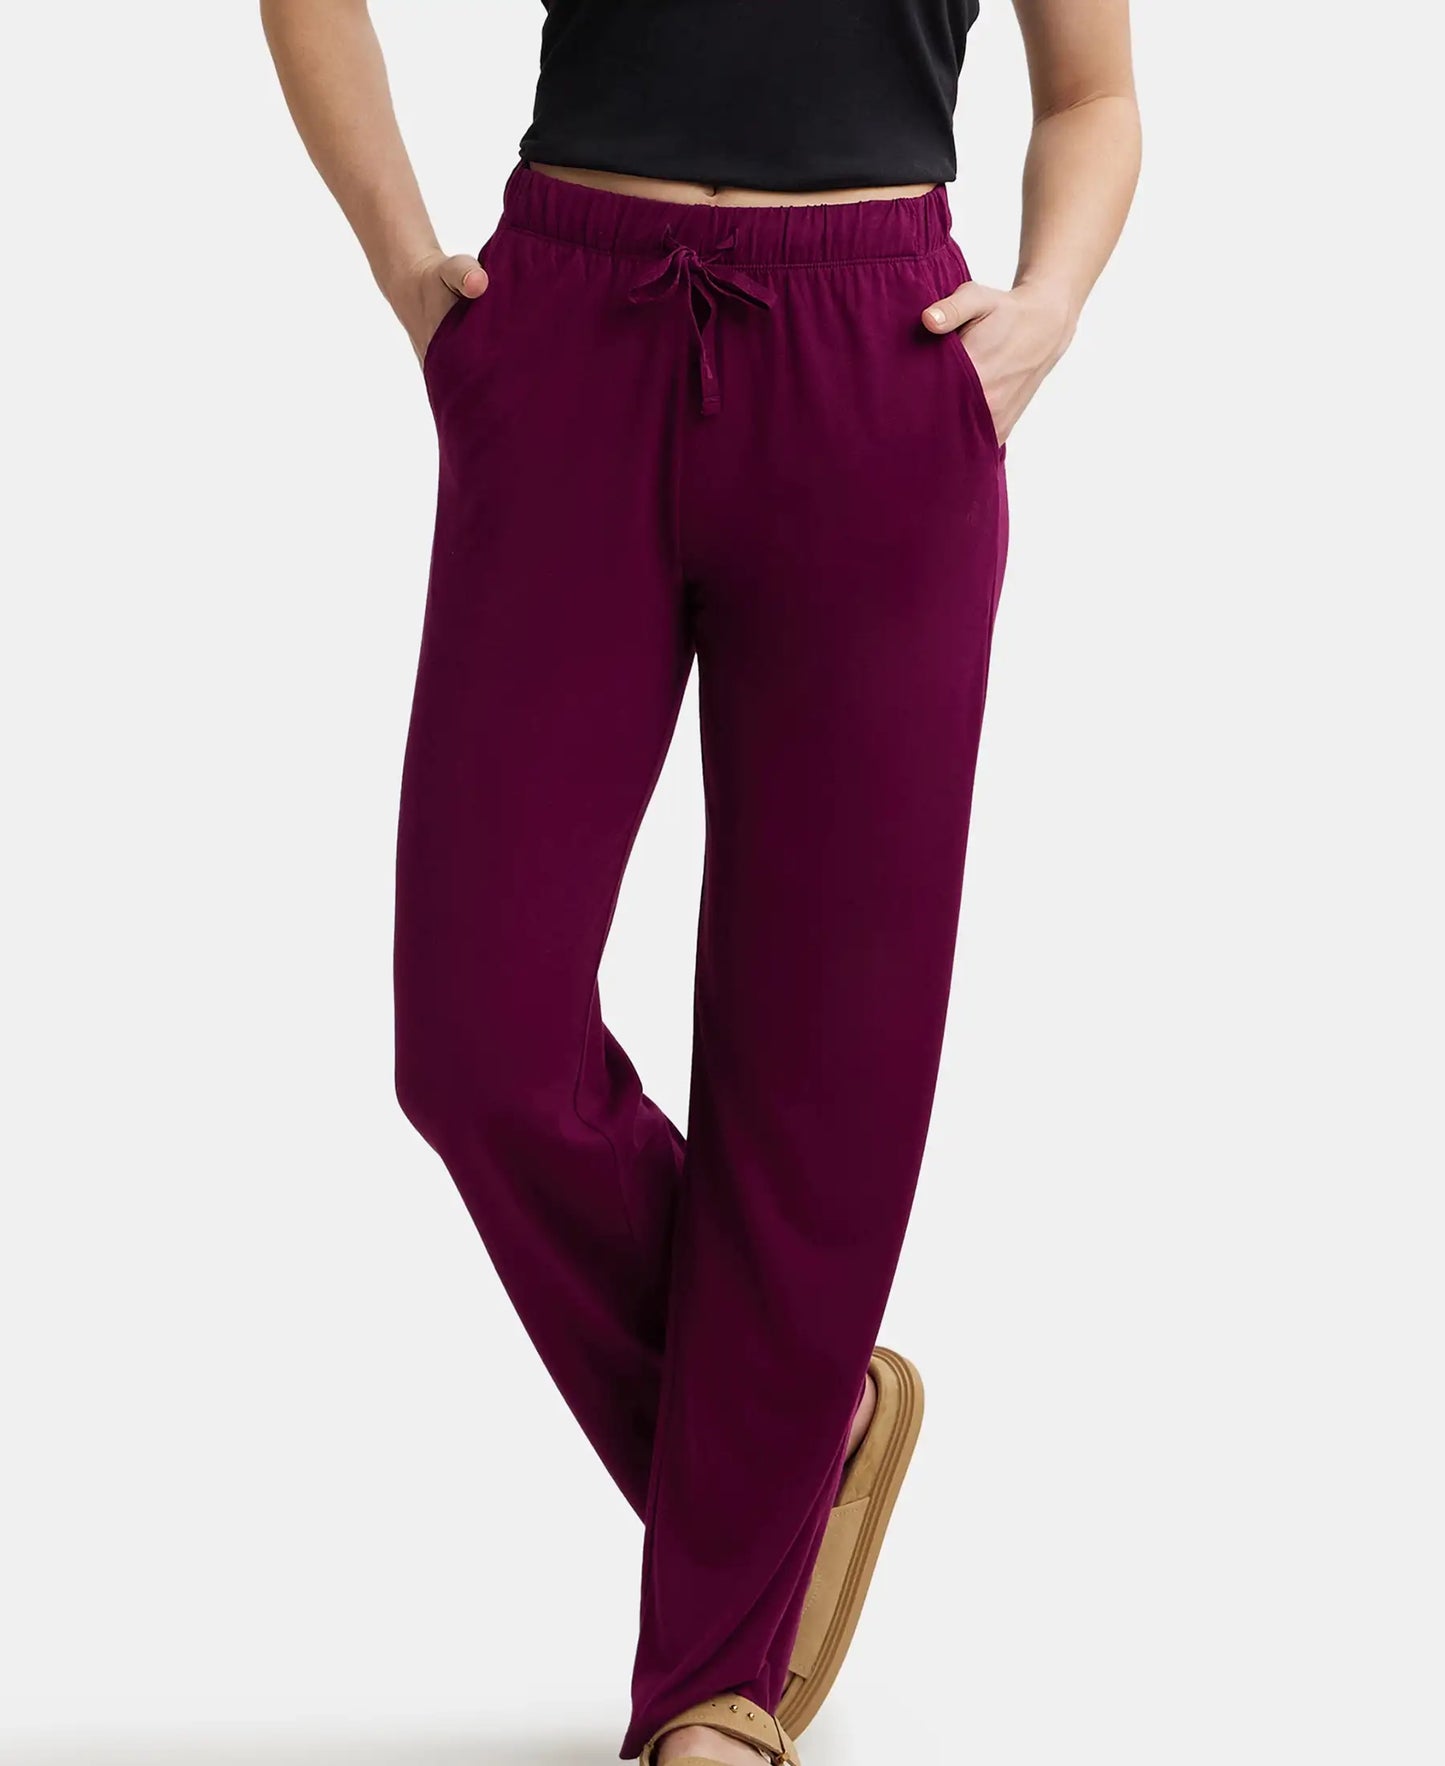 Micro Modal Cotton Relaxed Fit Printed Pyjama with Front Off-Seam Pockets - Purple Wine-5